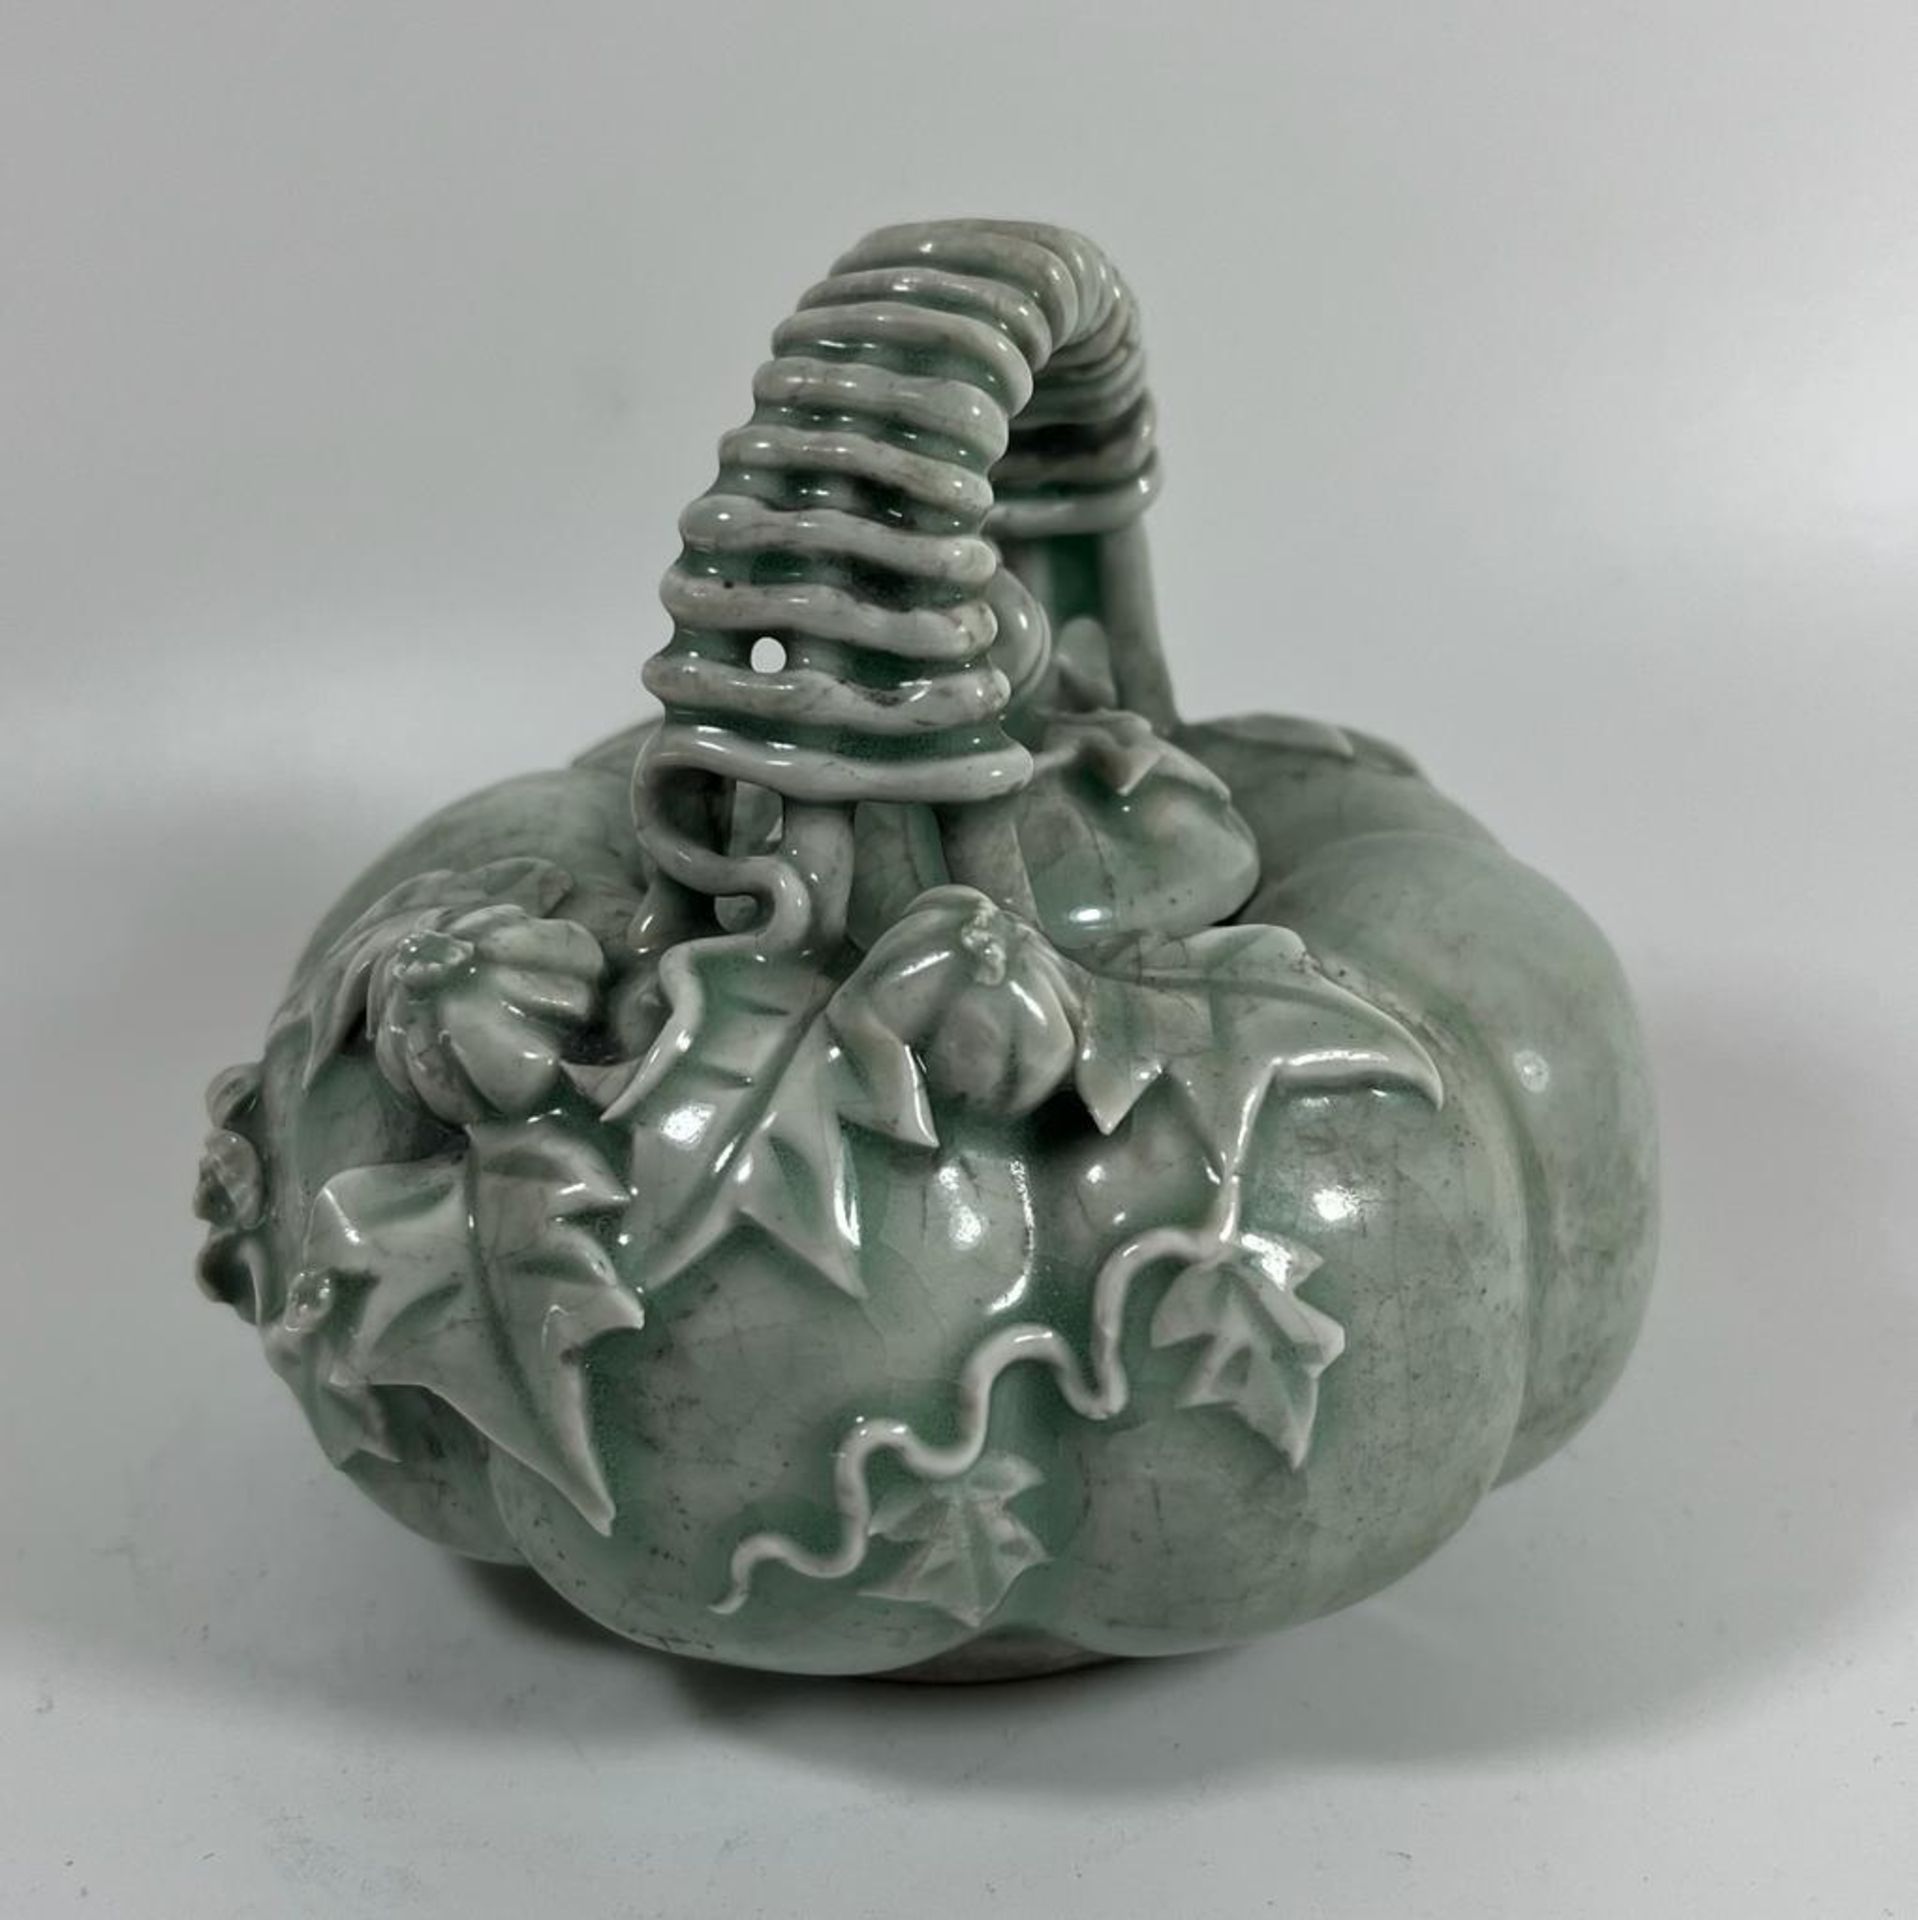 A CHINESE CELADON GLAZE TEAPOT WITH BRAIDED DESIGN HANDLE, HEIGHT 11 CM - Image 5 of 6